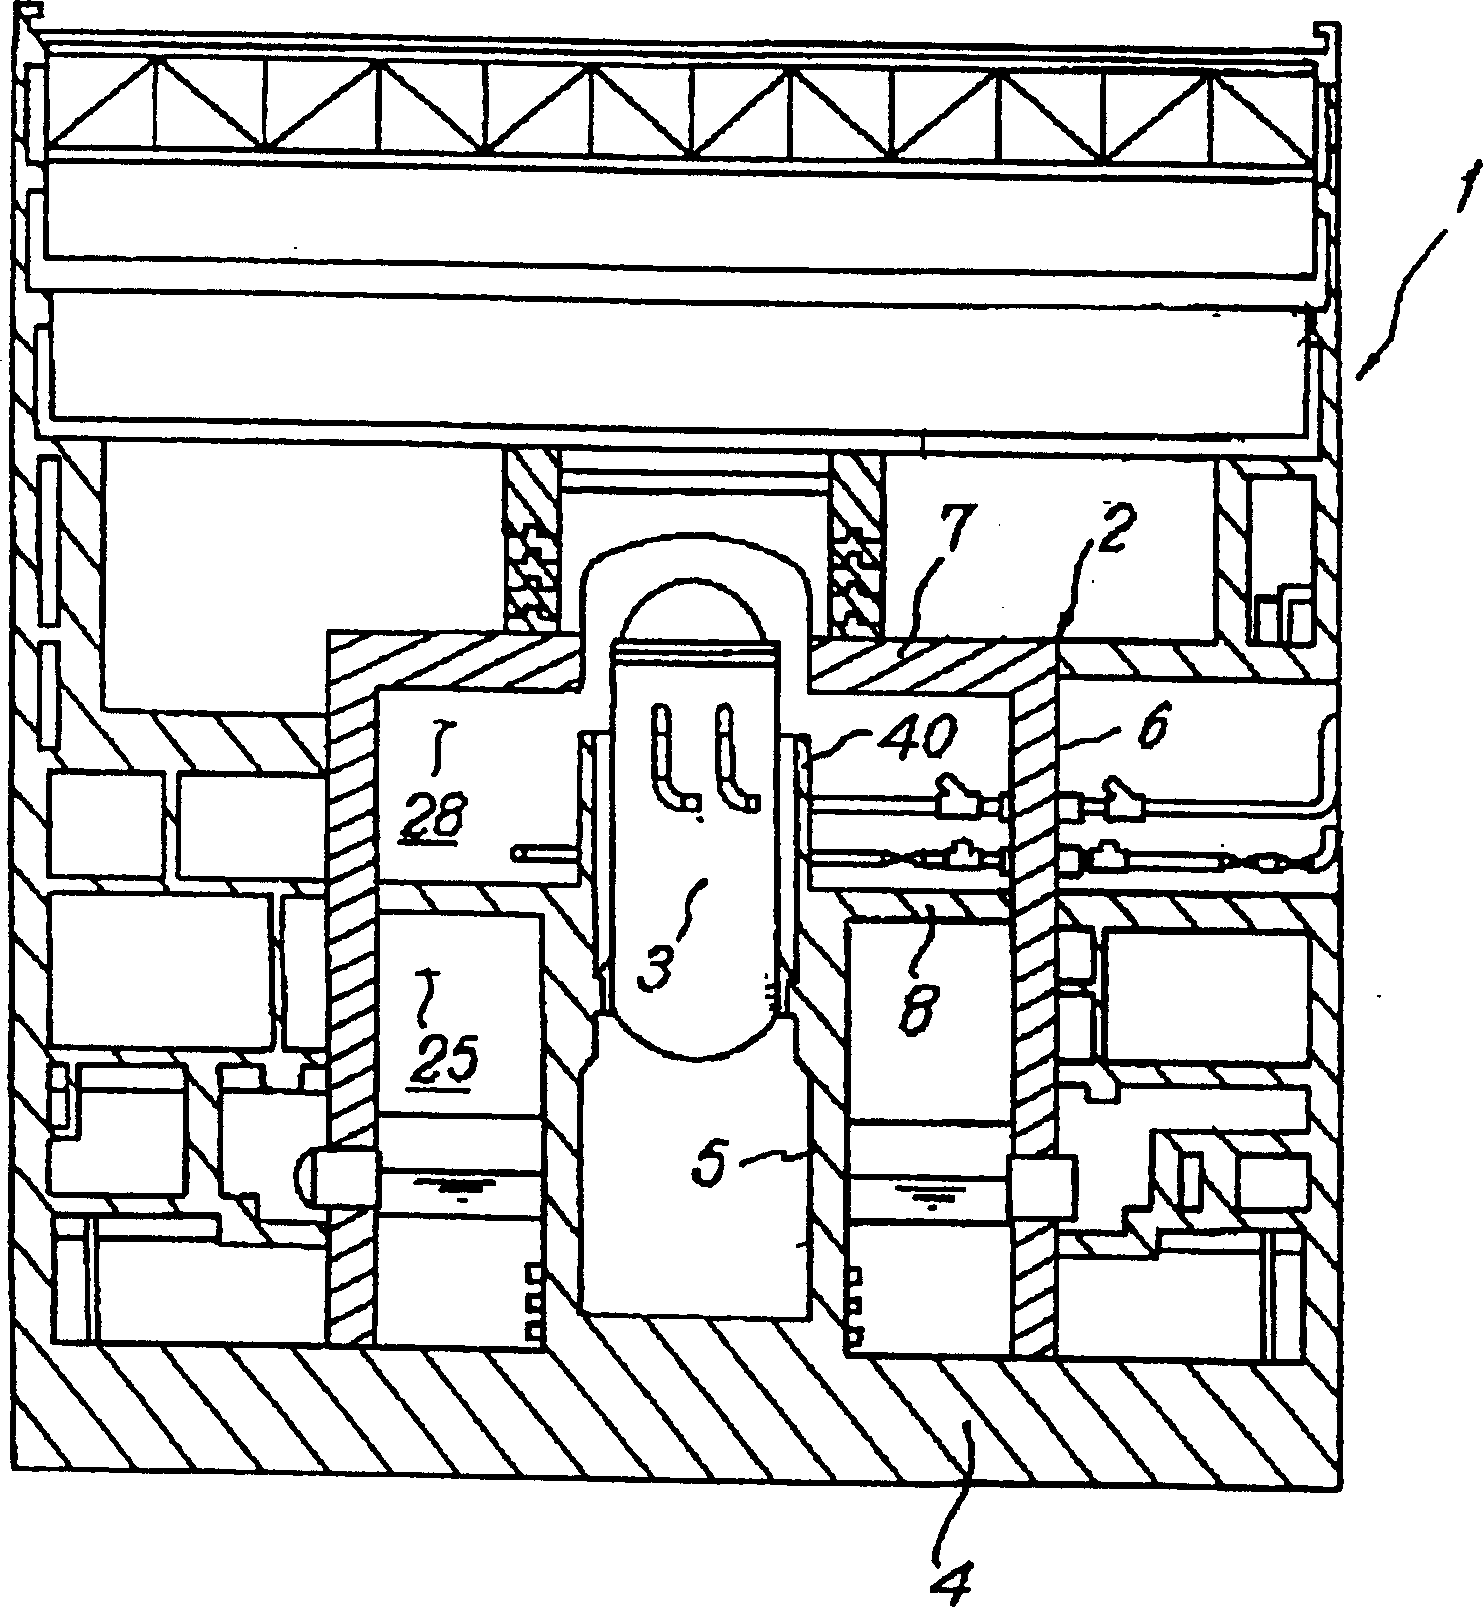 Reactor-containment vessel and its building method